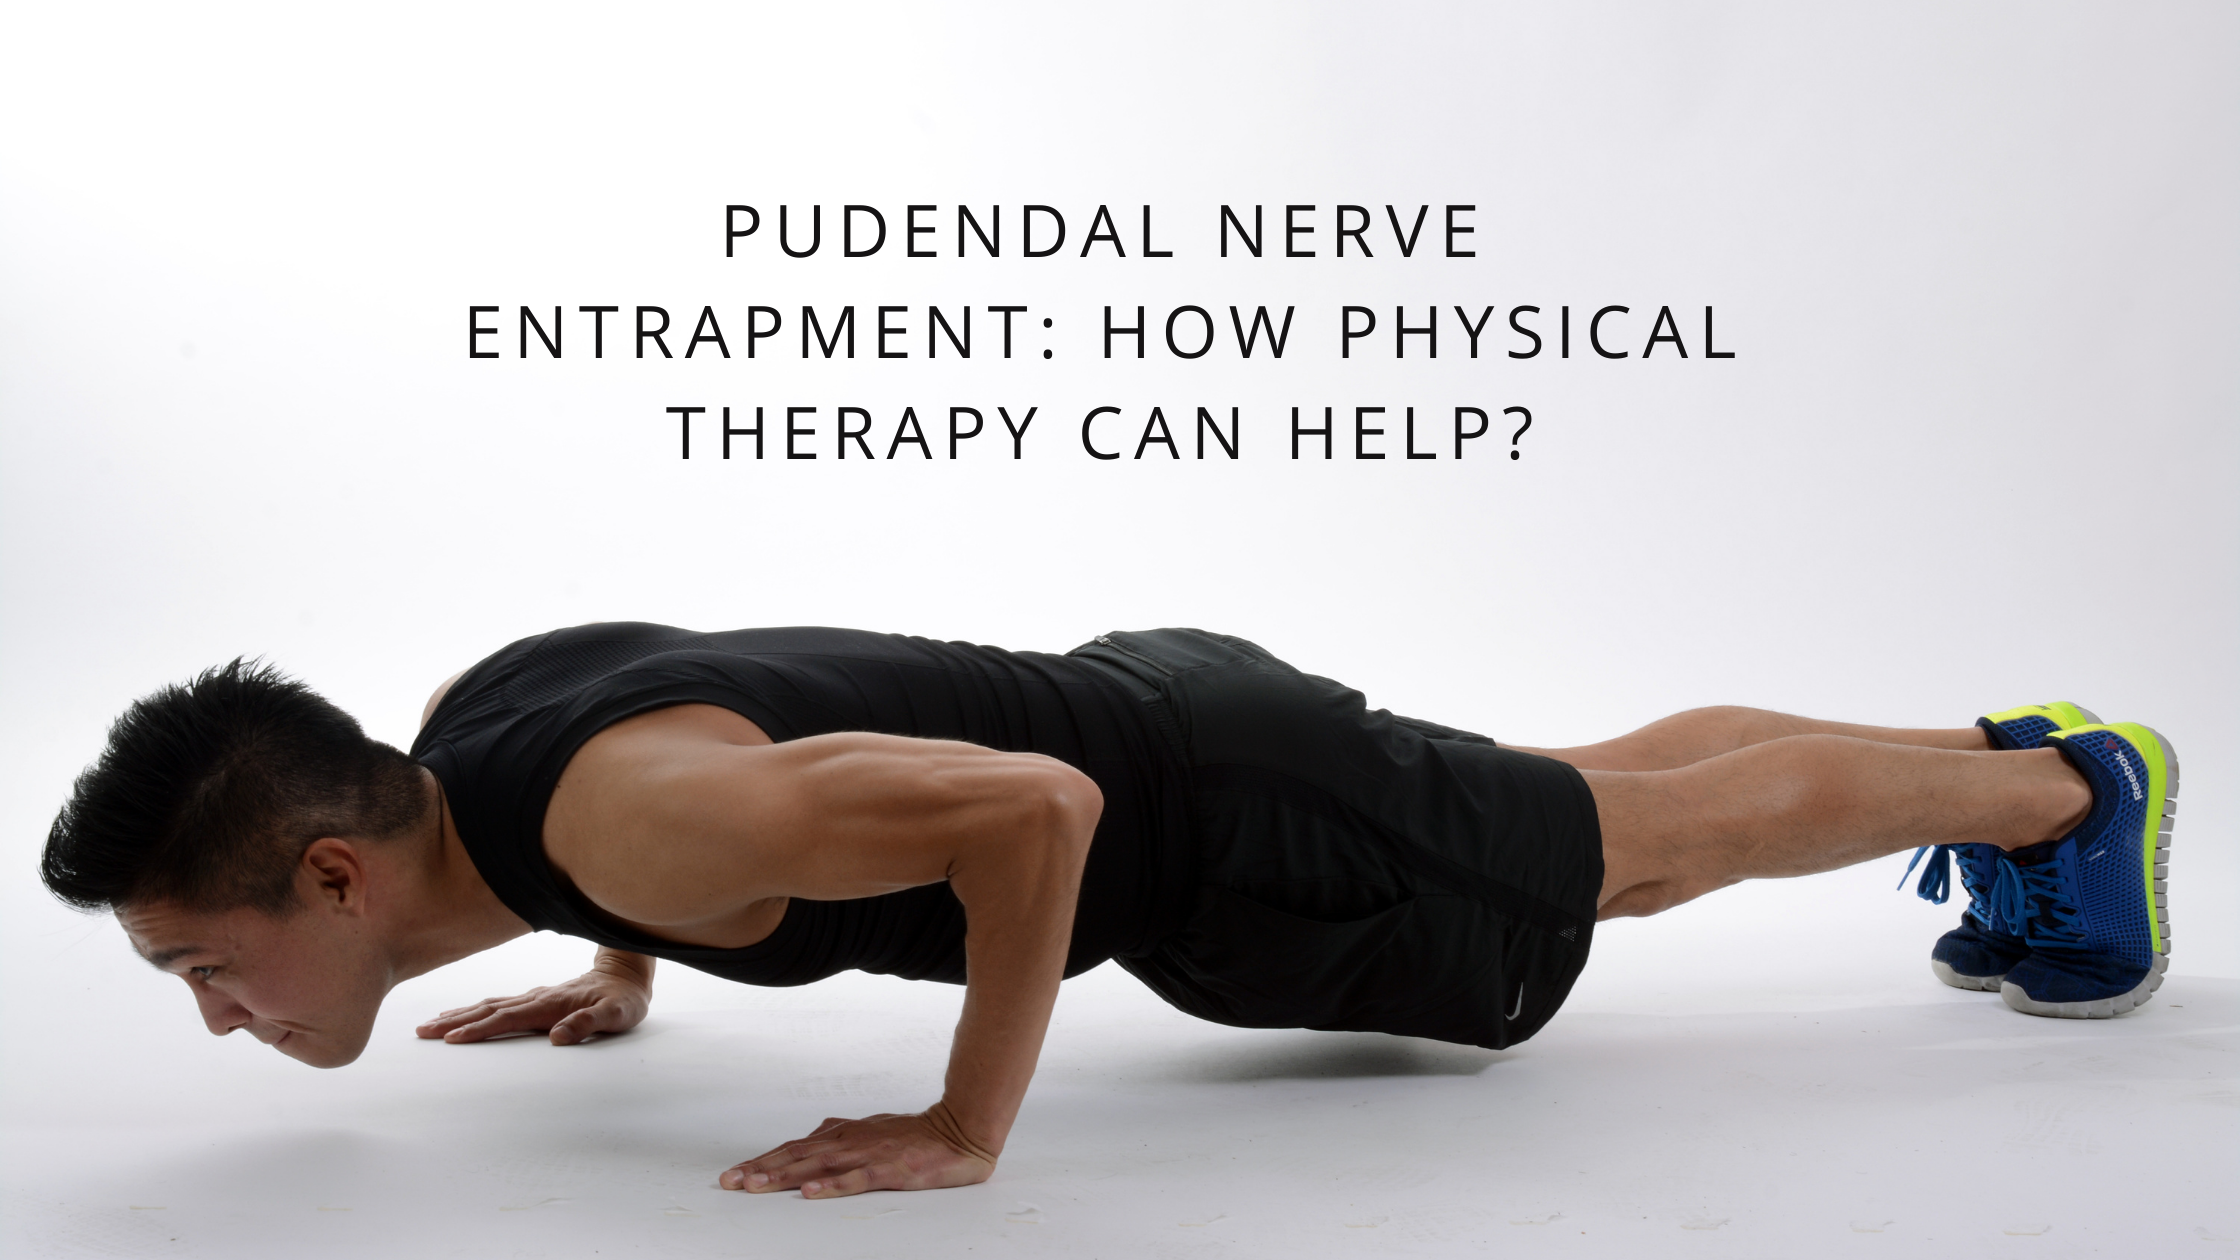 how physical therapy can help pudendal nerve entrapment